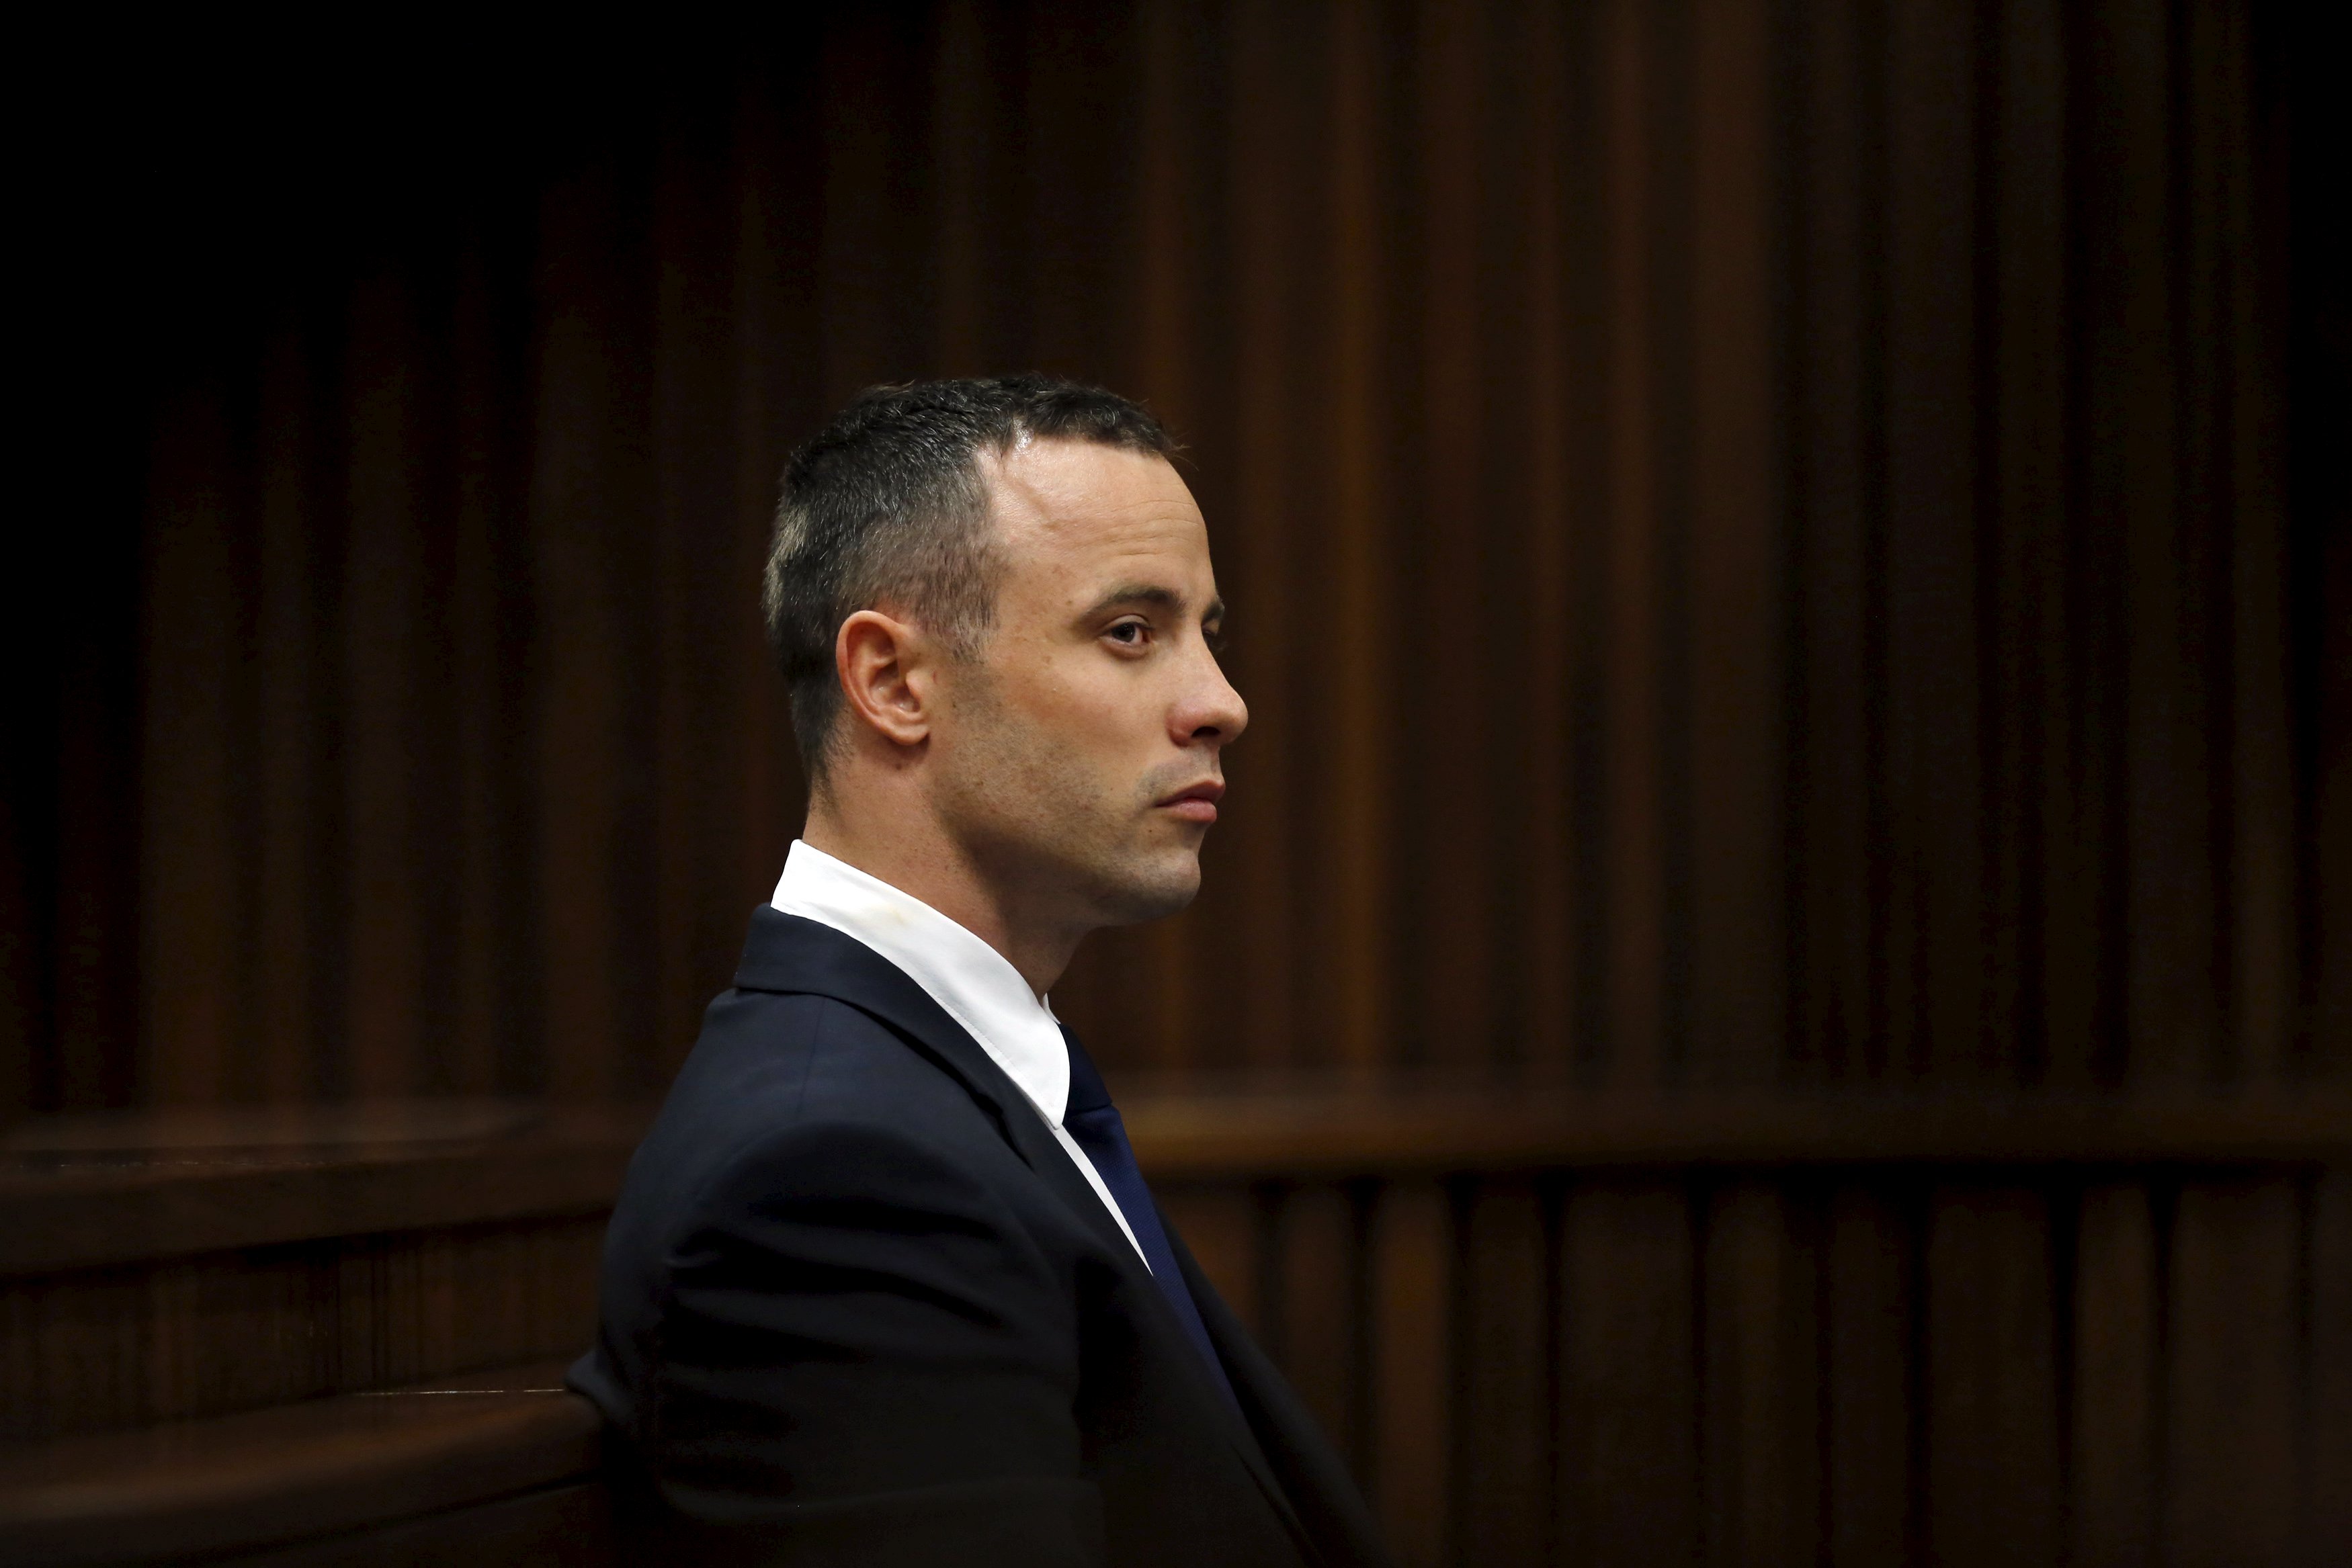 Oscar Pistorius during his trial in Pretoria in May last year. He is expected to wear an electronic tracking tag when he is released on Friday after serving 10 months of a five-year sentence for killing his model and law graduate girlfriend Reeva Steenkamp on Valentine's Day in 2013. Photo: Reuters